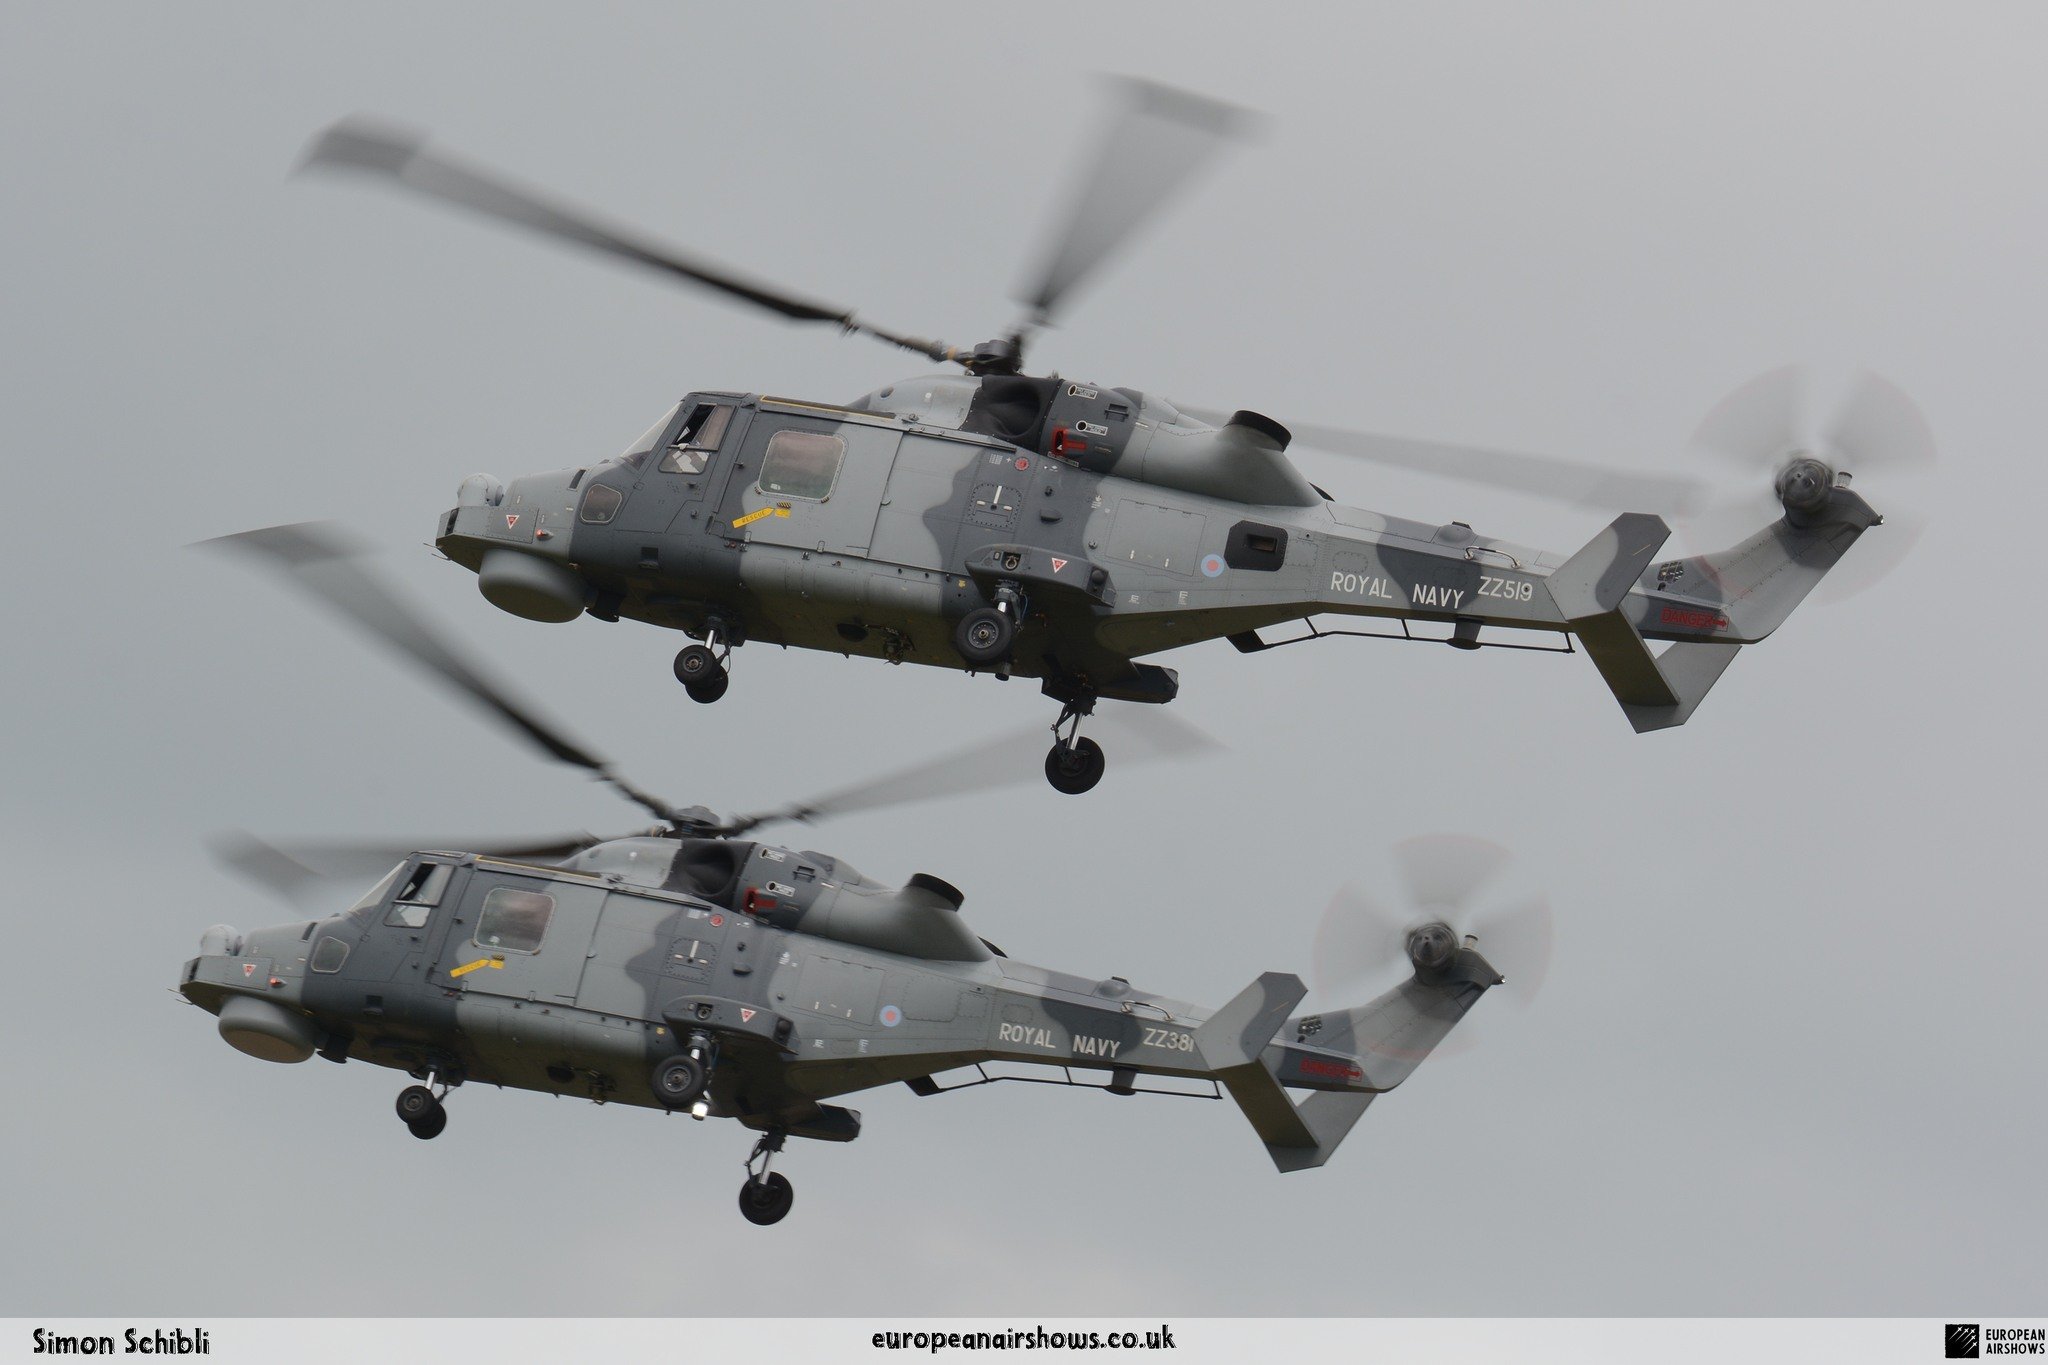 𝐀𝐈𝐑𝐒𝐇𝐎𝐖 𝐍𝐄𝐖𝐒: The Royal Navy Black Cats Helicopter Display Team has announced the pilots and schedule for its 2024 season.

Read more on our website by clicking the link below.

https://www.europeanairshows.co.uk/news/royal-navy-black-cats